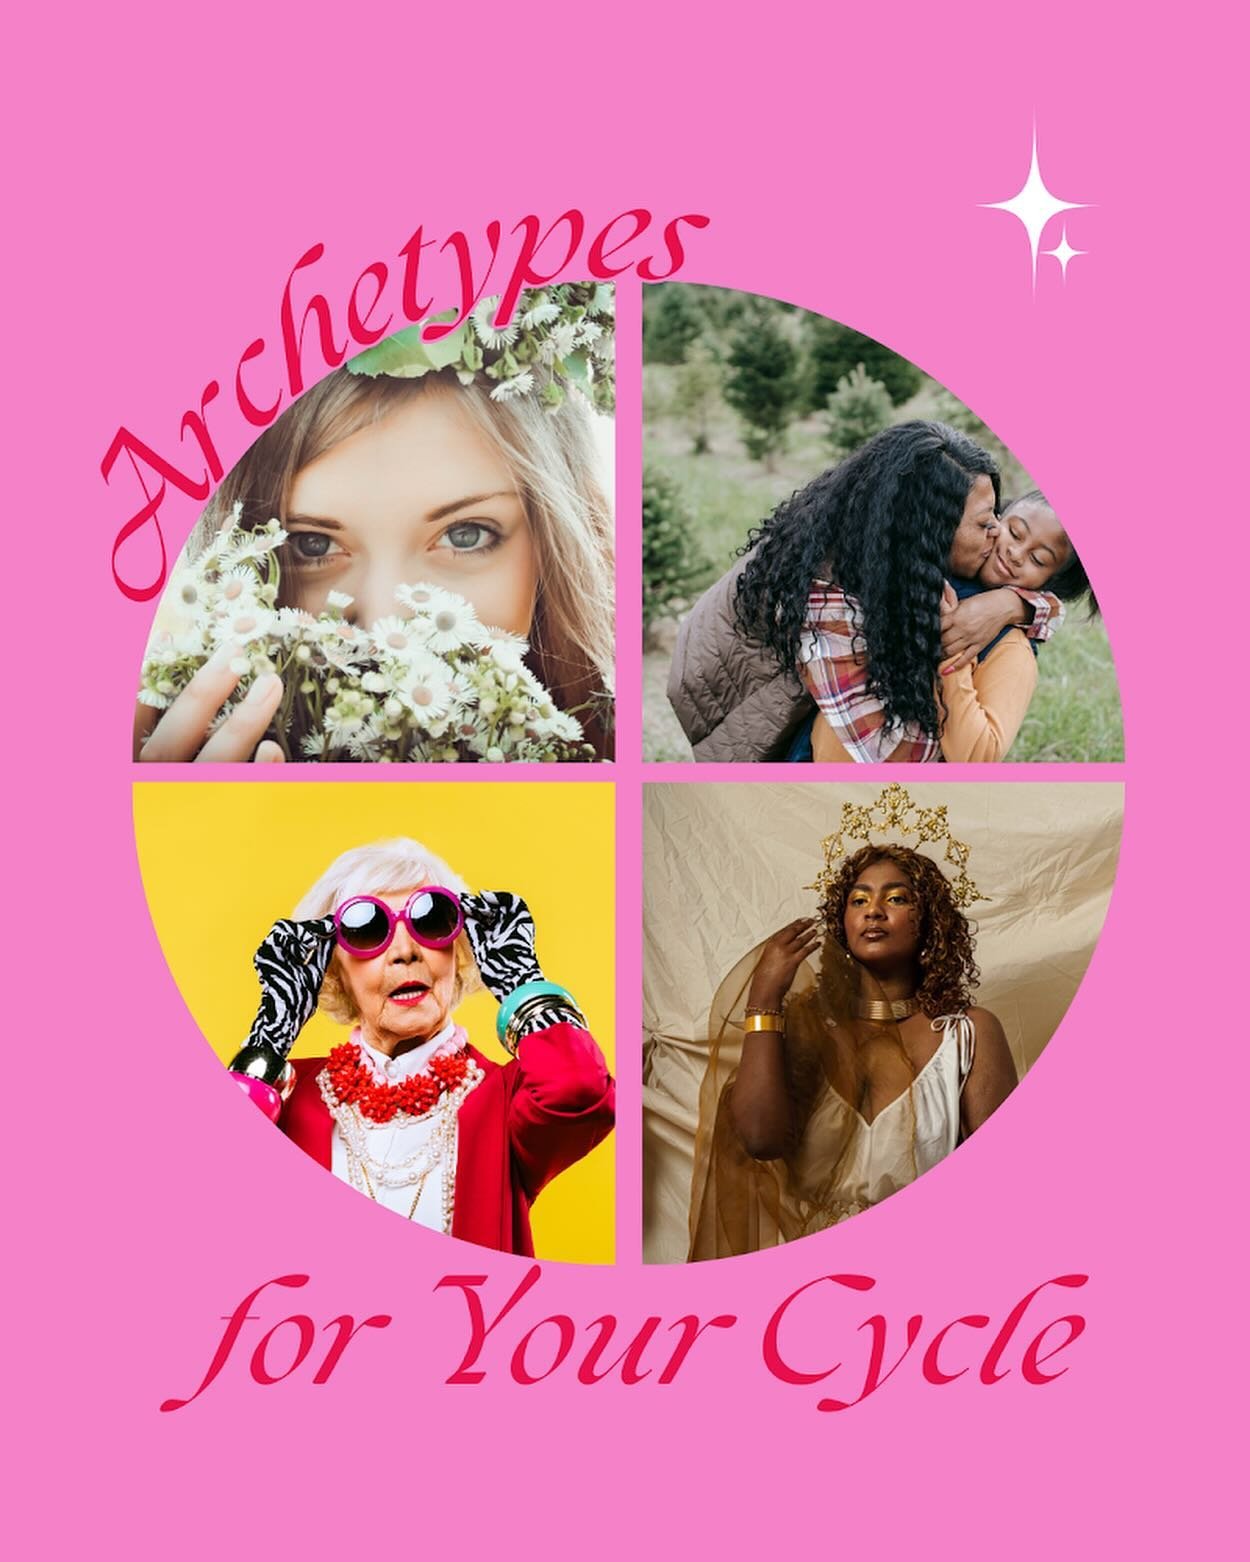 You&rsquo;re likely familiar with the inner seasons framework of menstrual cycle awareness, where we liken each phase of the menstrual cycle to one of Mama Earth&rsquo;s seasons.

Today I want to introduce you to the archetypes framework, which can s